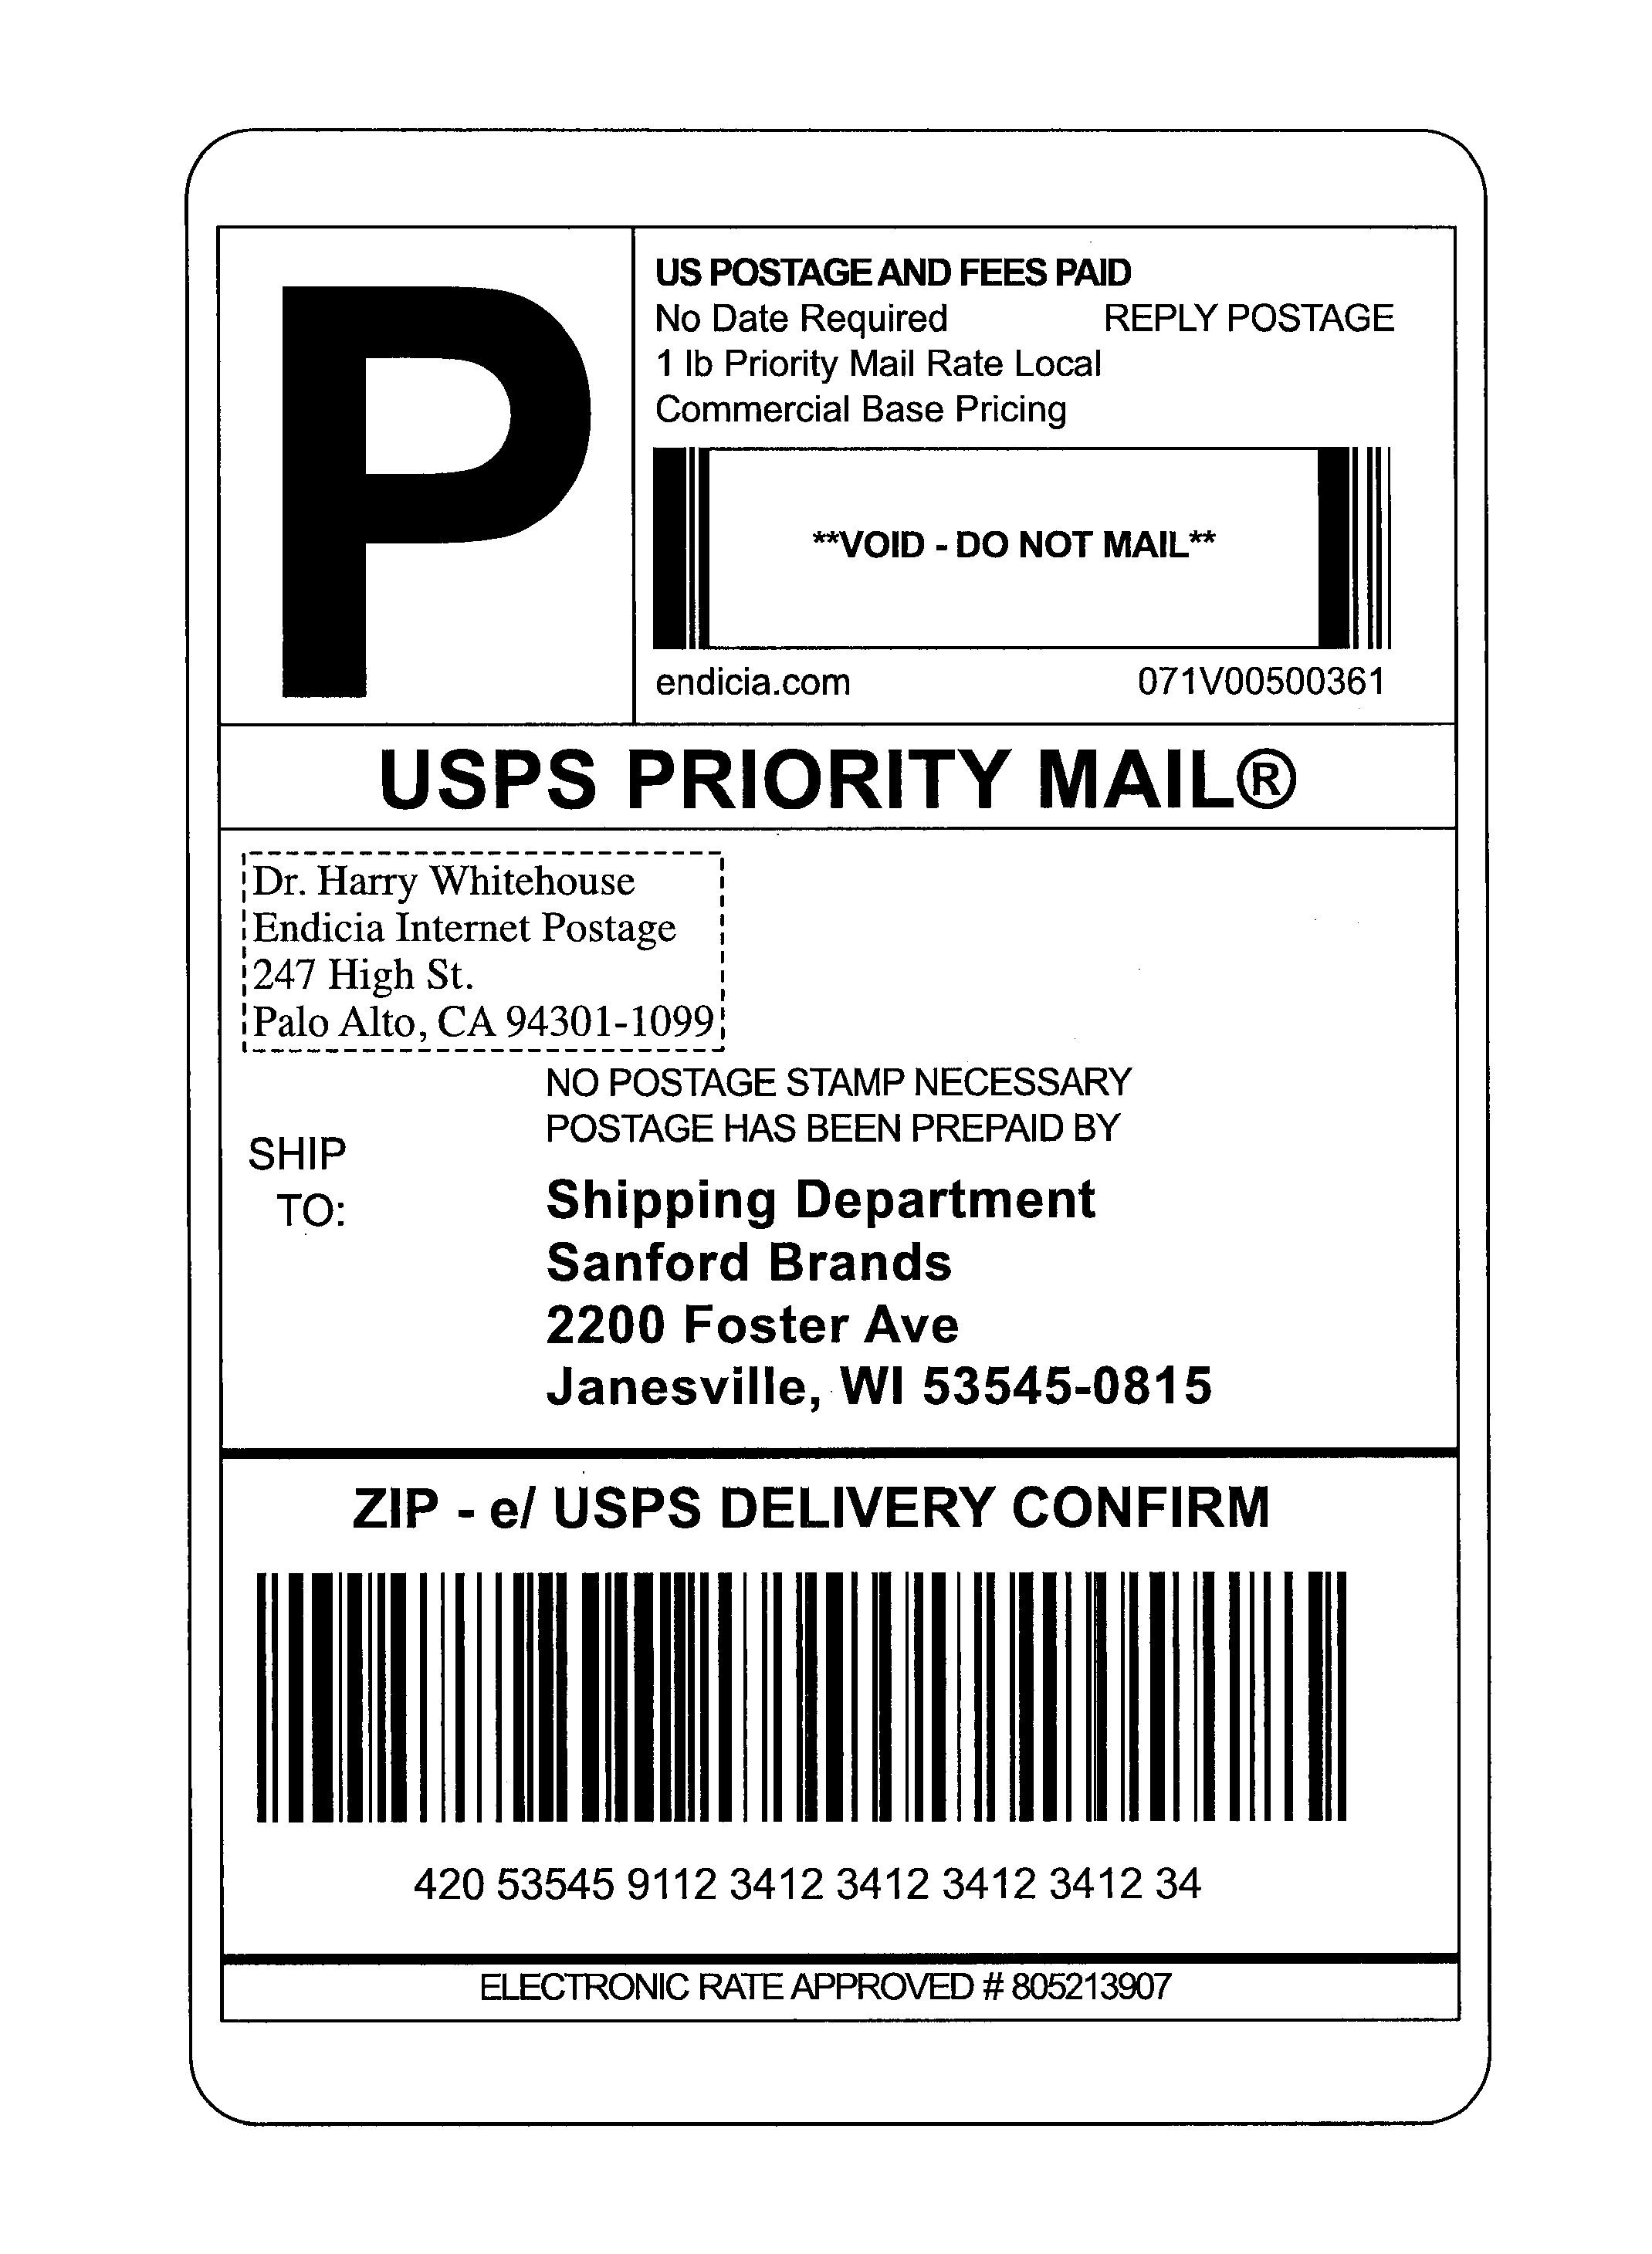 Usps Shipping Label Template  Best And Professional Templates pertaining to Usps Shipping Label Template